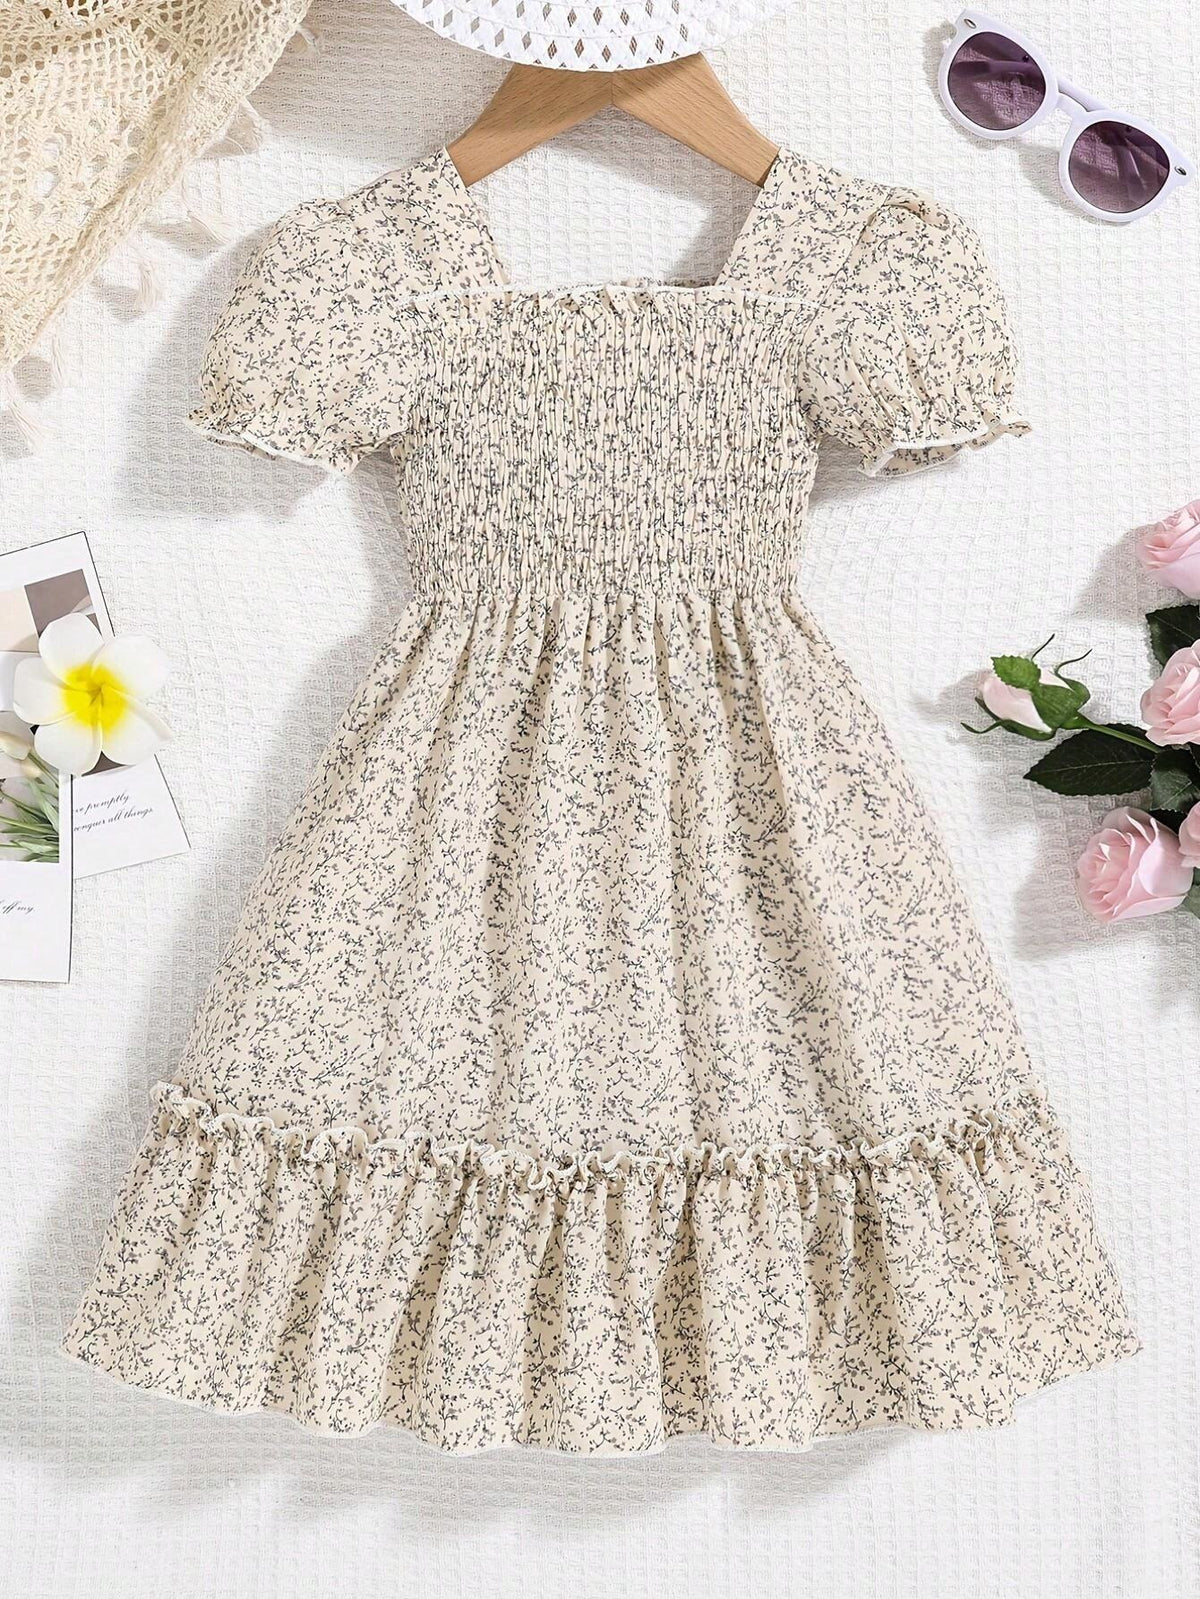 European And American Girls Summer Casual Floral Dress, Suitable For Outings, Vacations, And Party Dress.